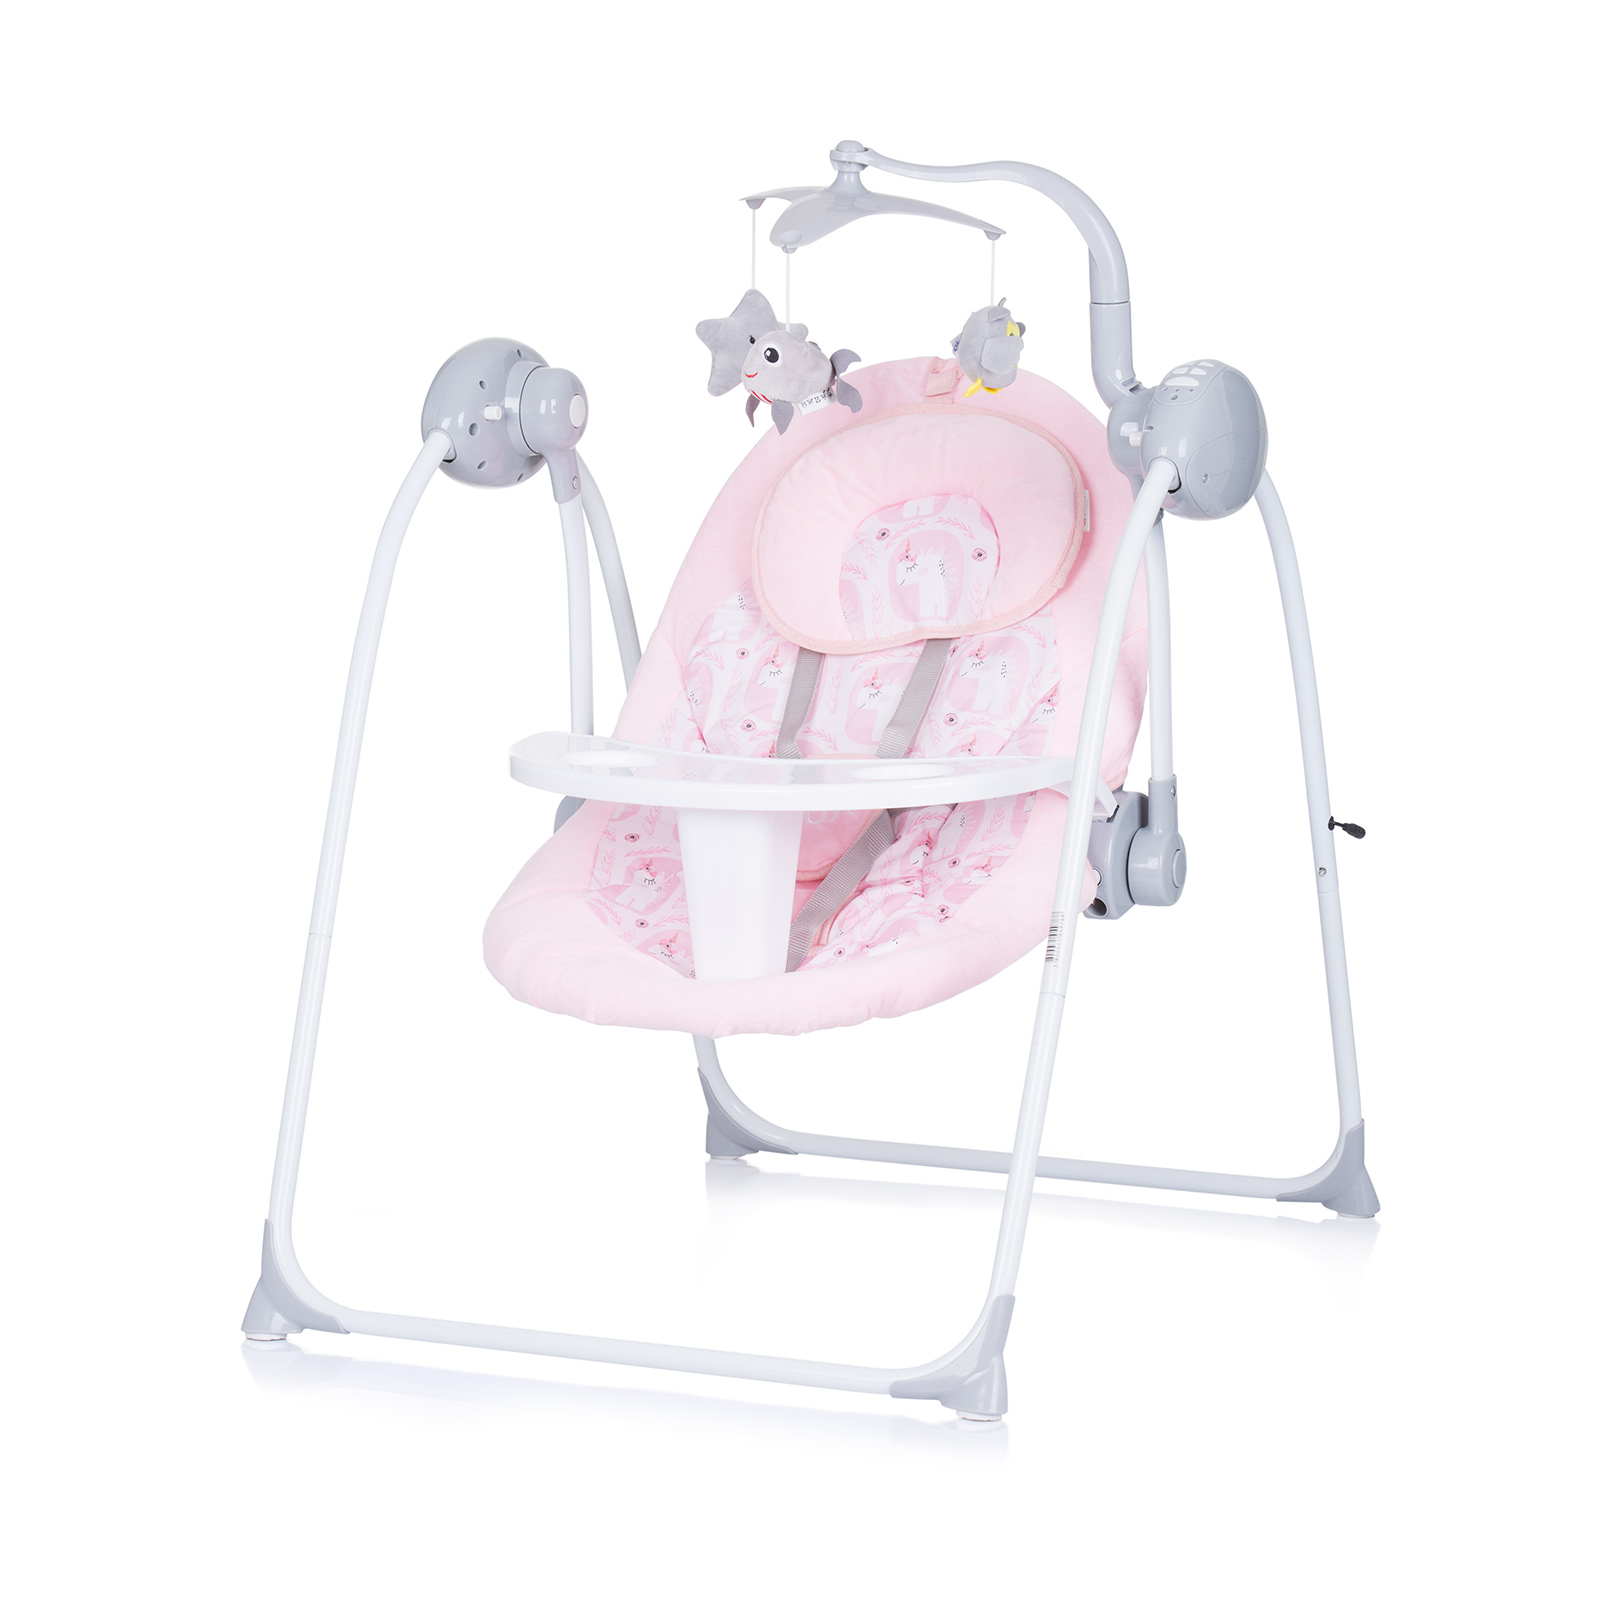 Electric Baby Swing “Nux” – Blush